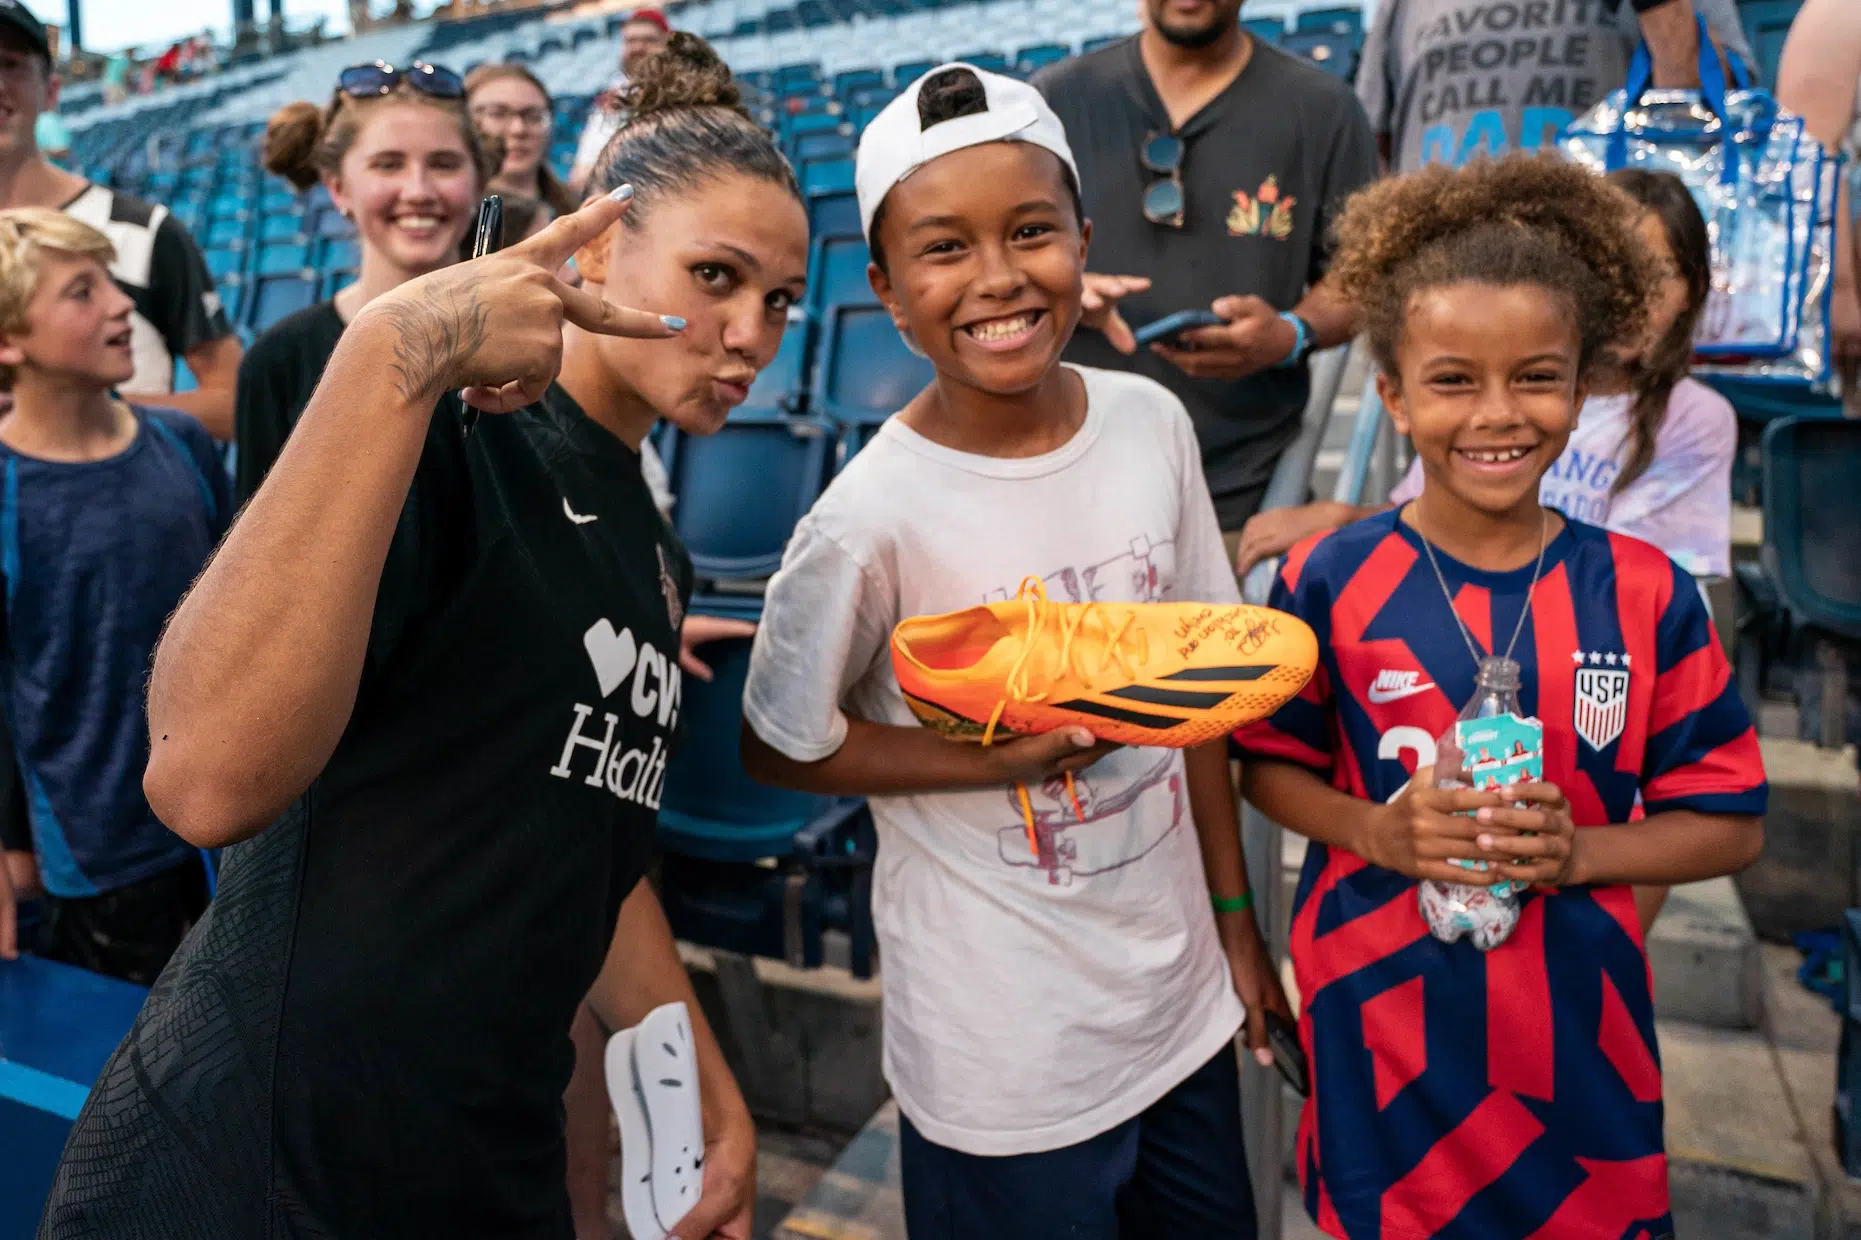 Trinity Rodman in a black jersey holds up a peace sign as she poses for a photo with two young fans. The fan closest to her holds one of her orange cleats with her autograph.